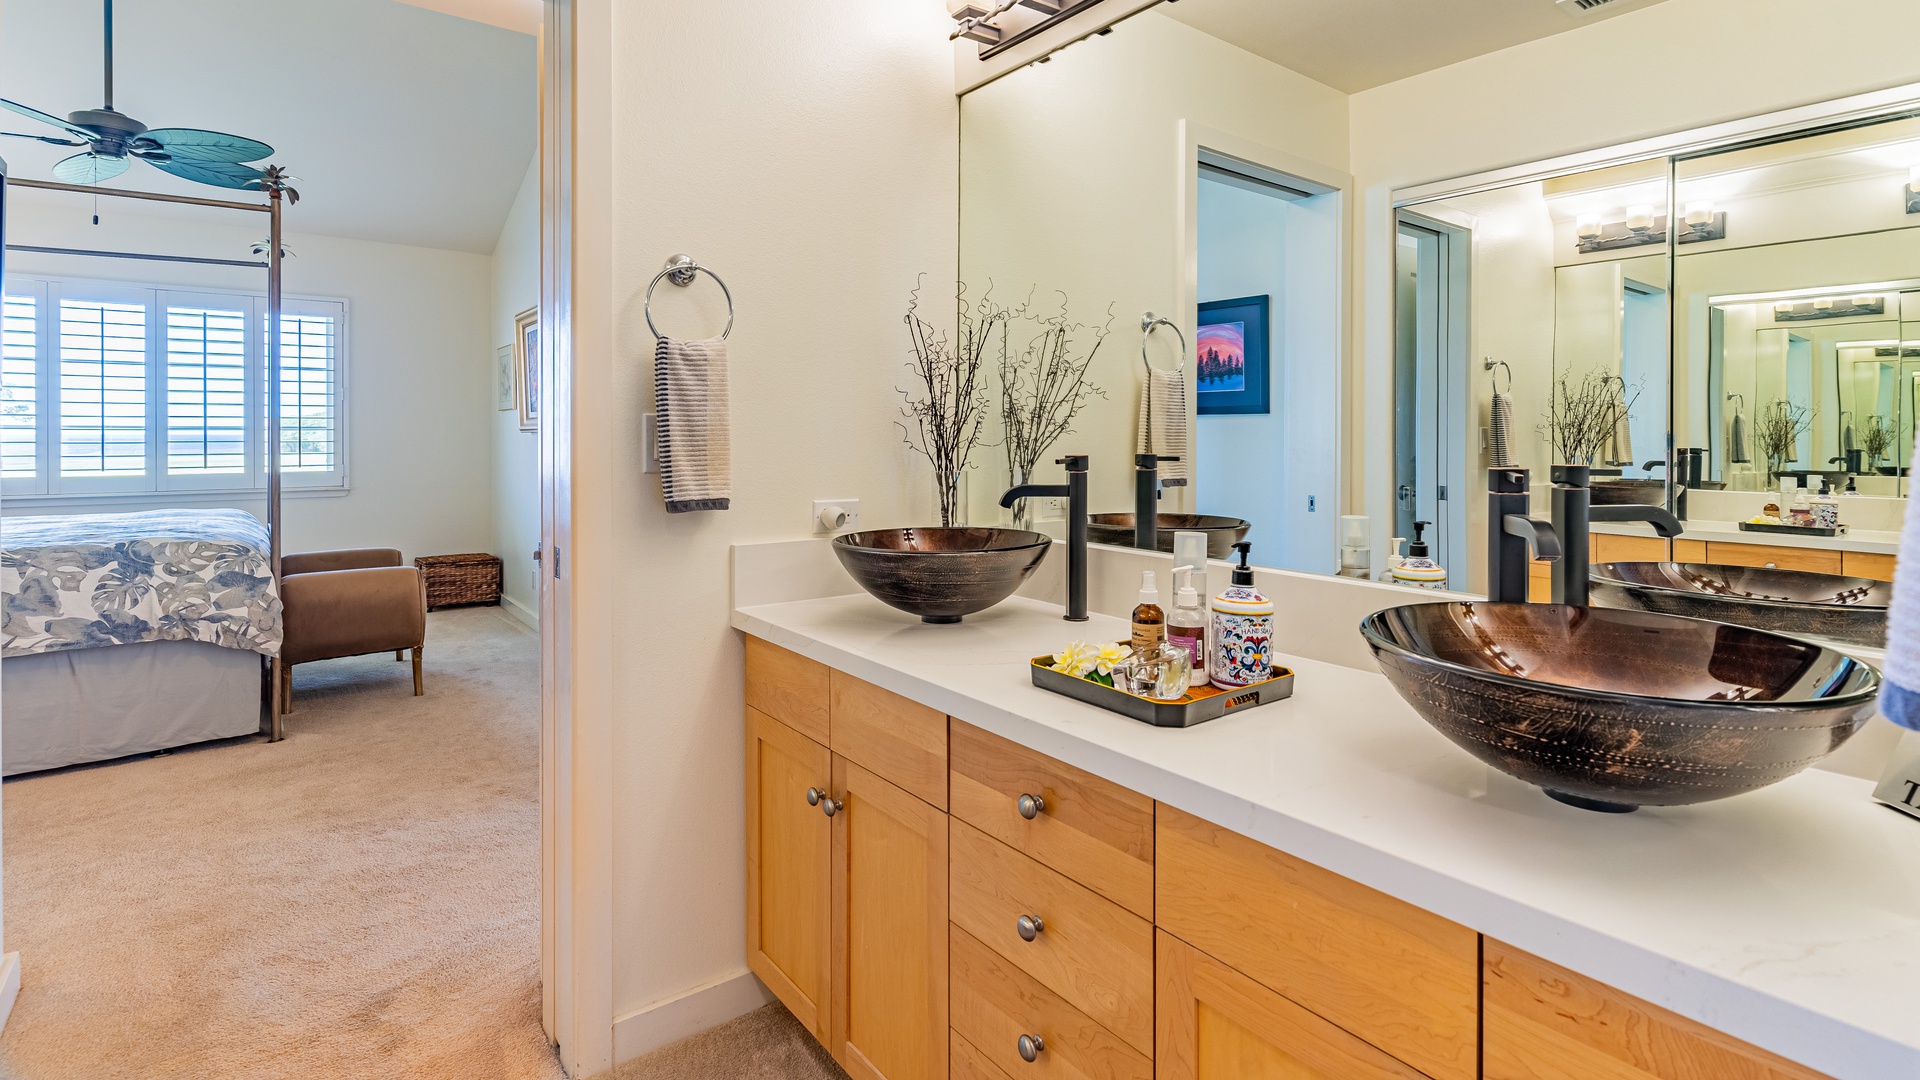 Kapolei Vacation Rentals, Kai Lani 20C - The primary guest bathroom reflects the spirit of Hawaii.